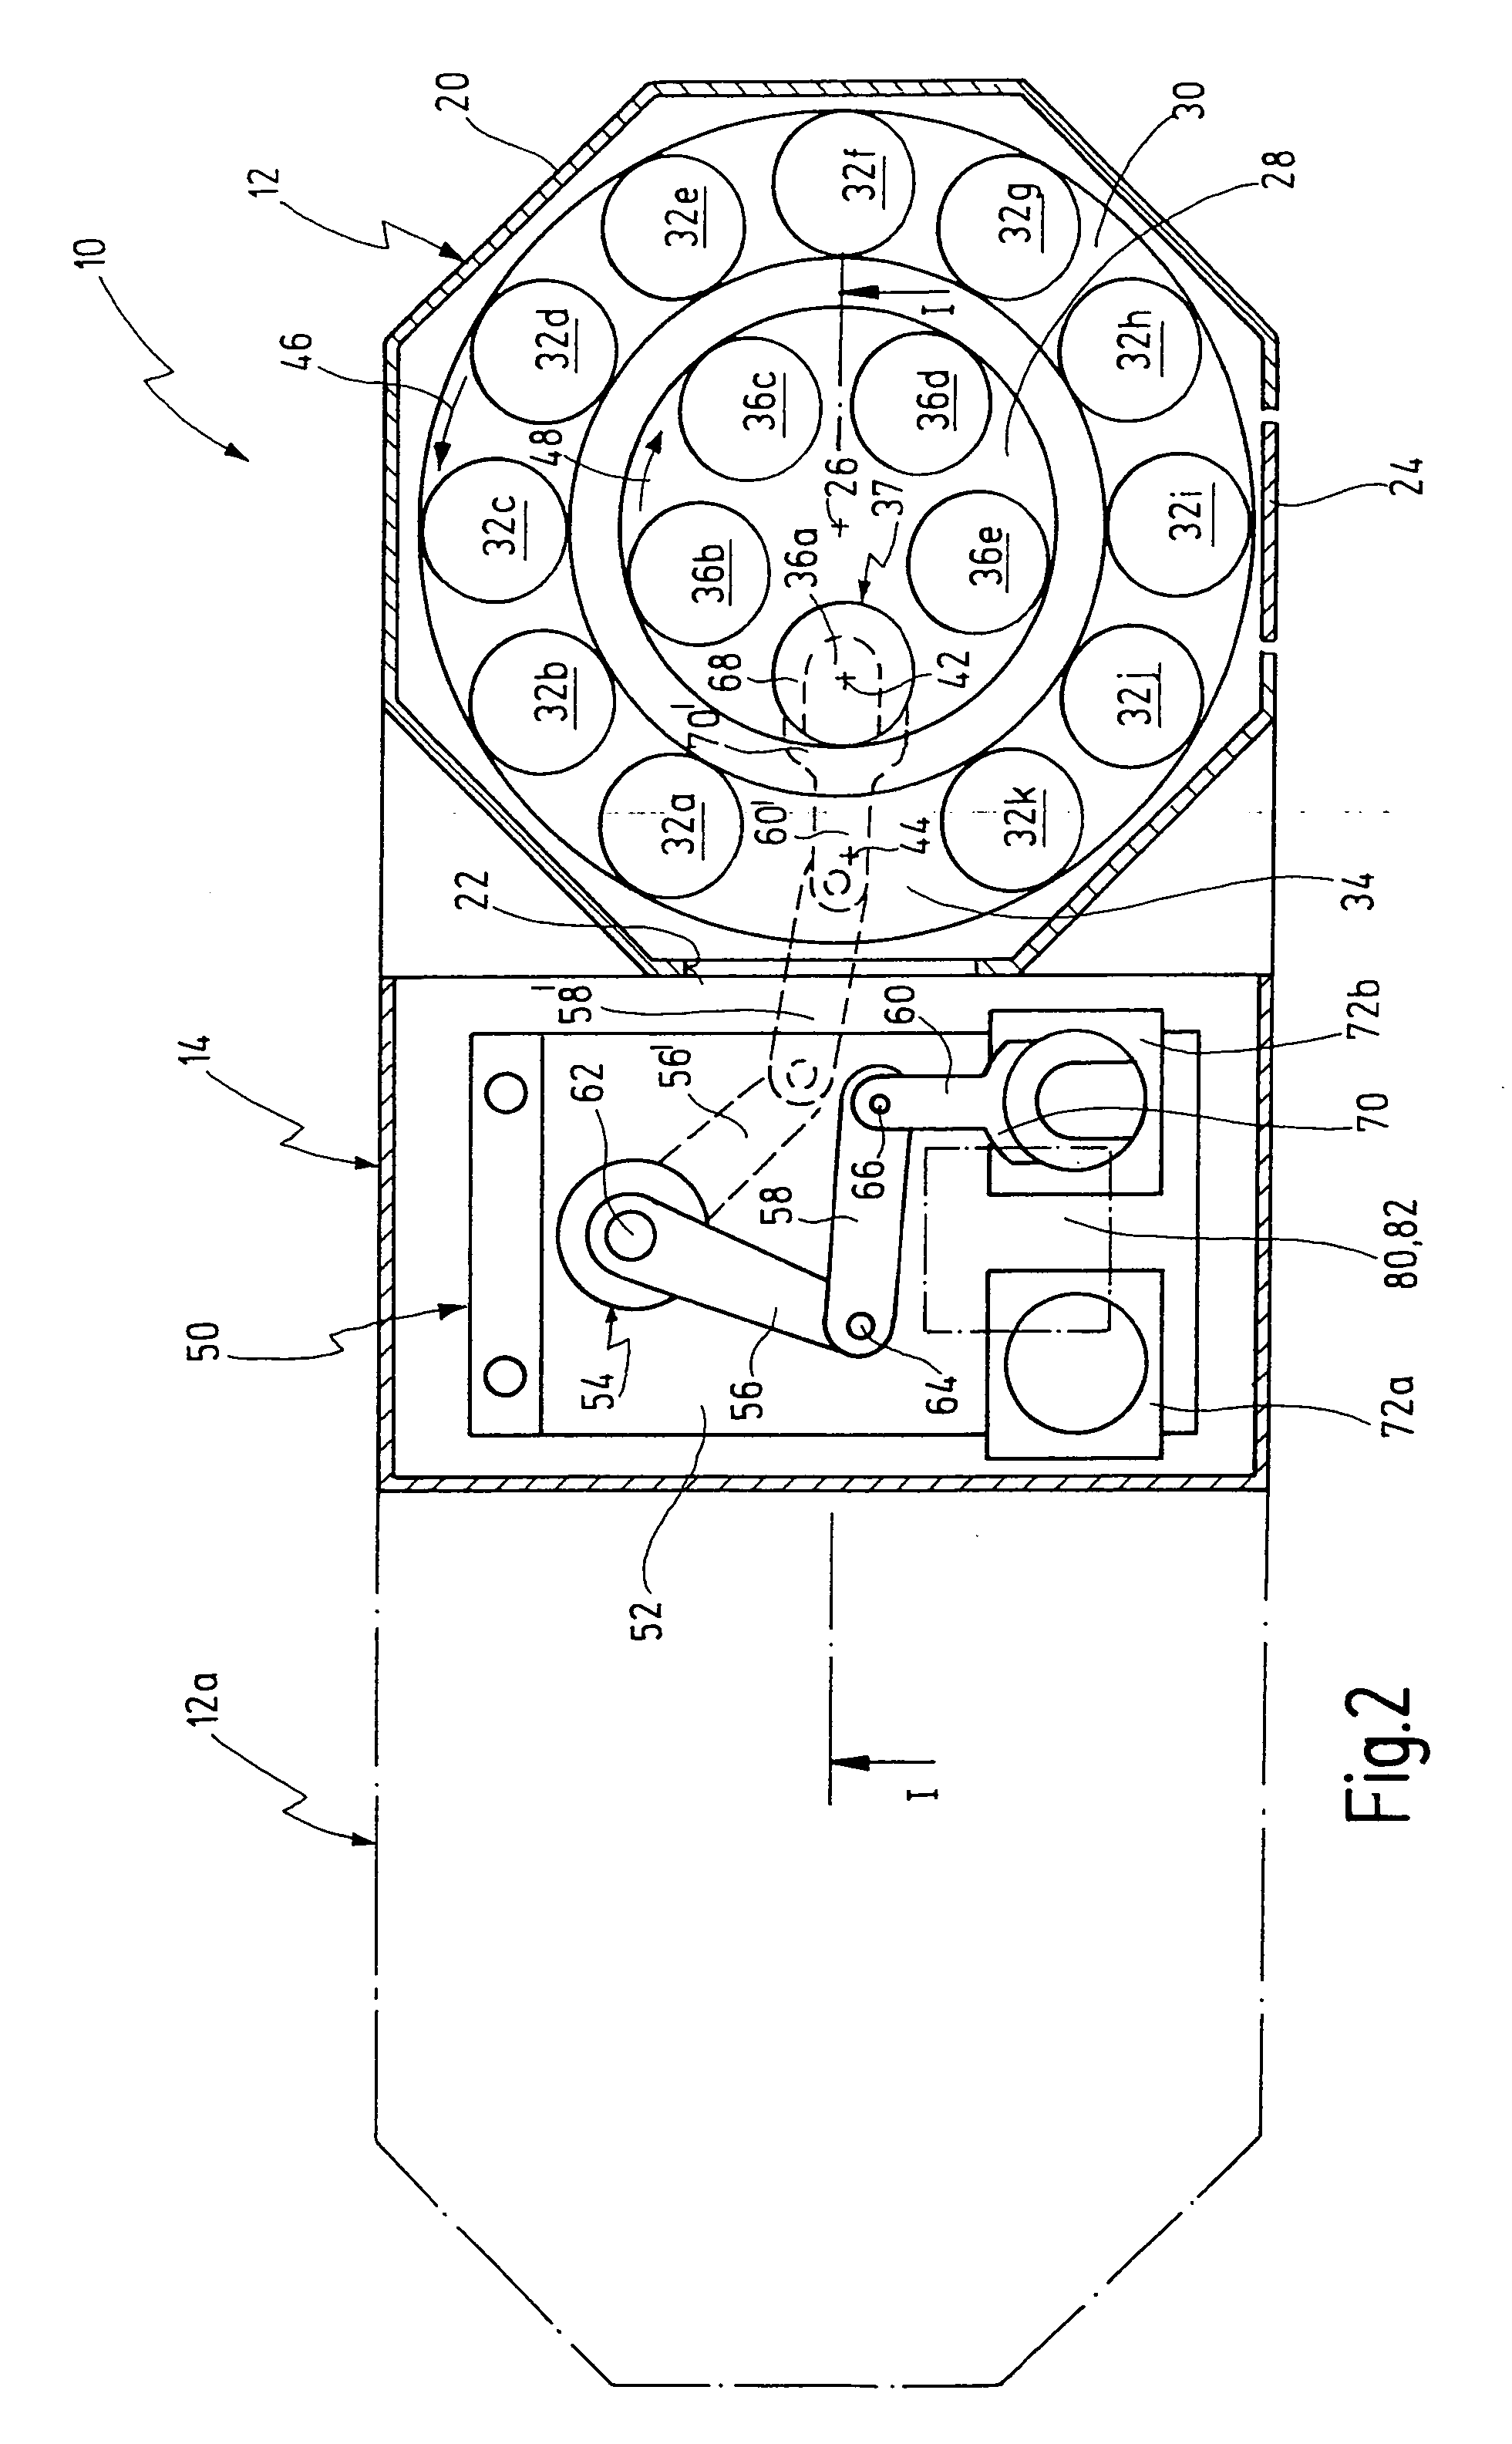 Storage system for wafers and other objects used in the production of semiconductor products